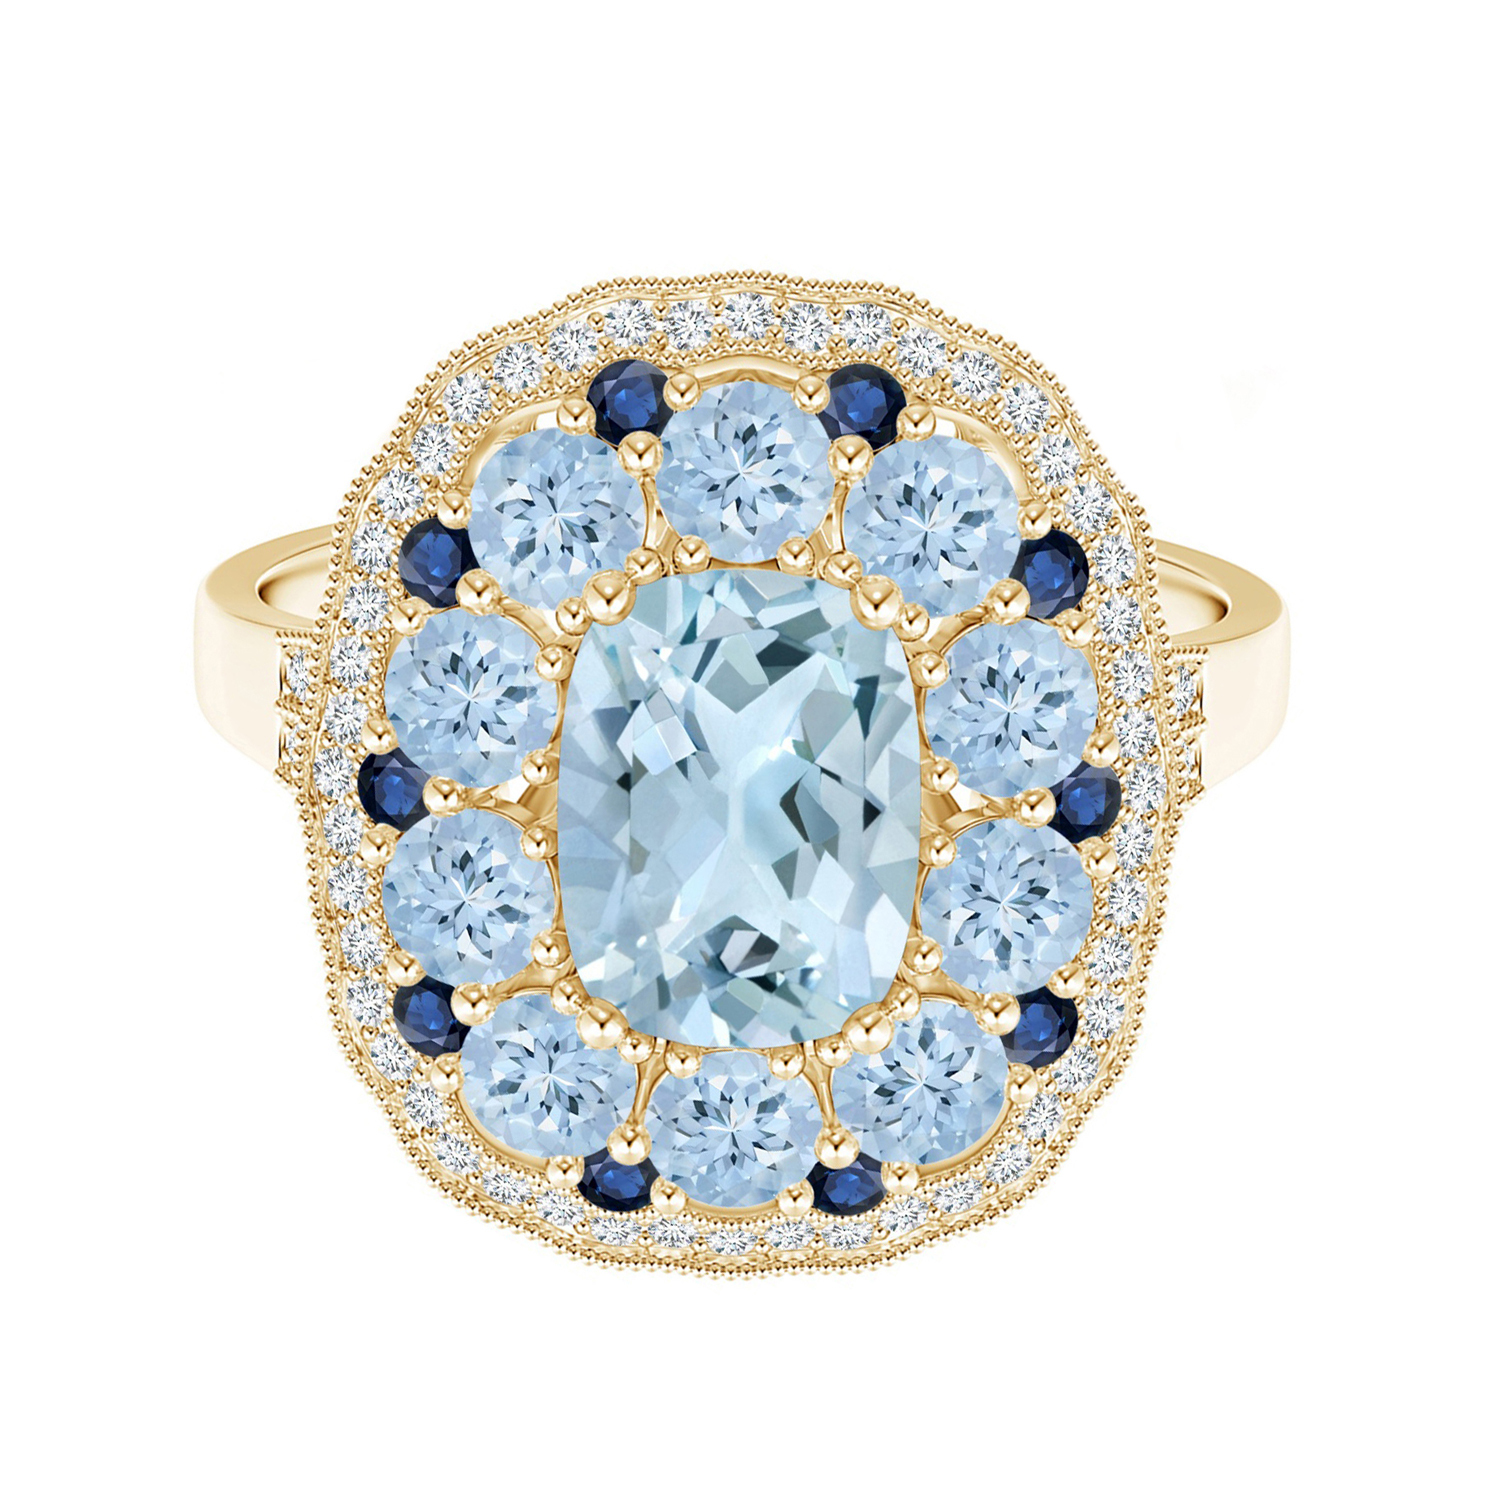 Vintage Style Ring!! Oval Cut Blue Aquamarine Gemstone Solitaire Ring 9k Yellow